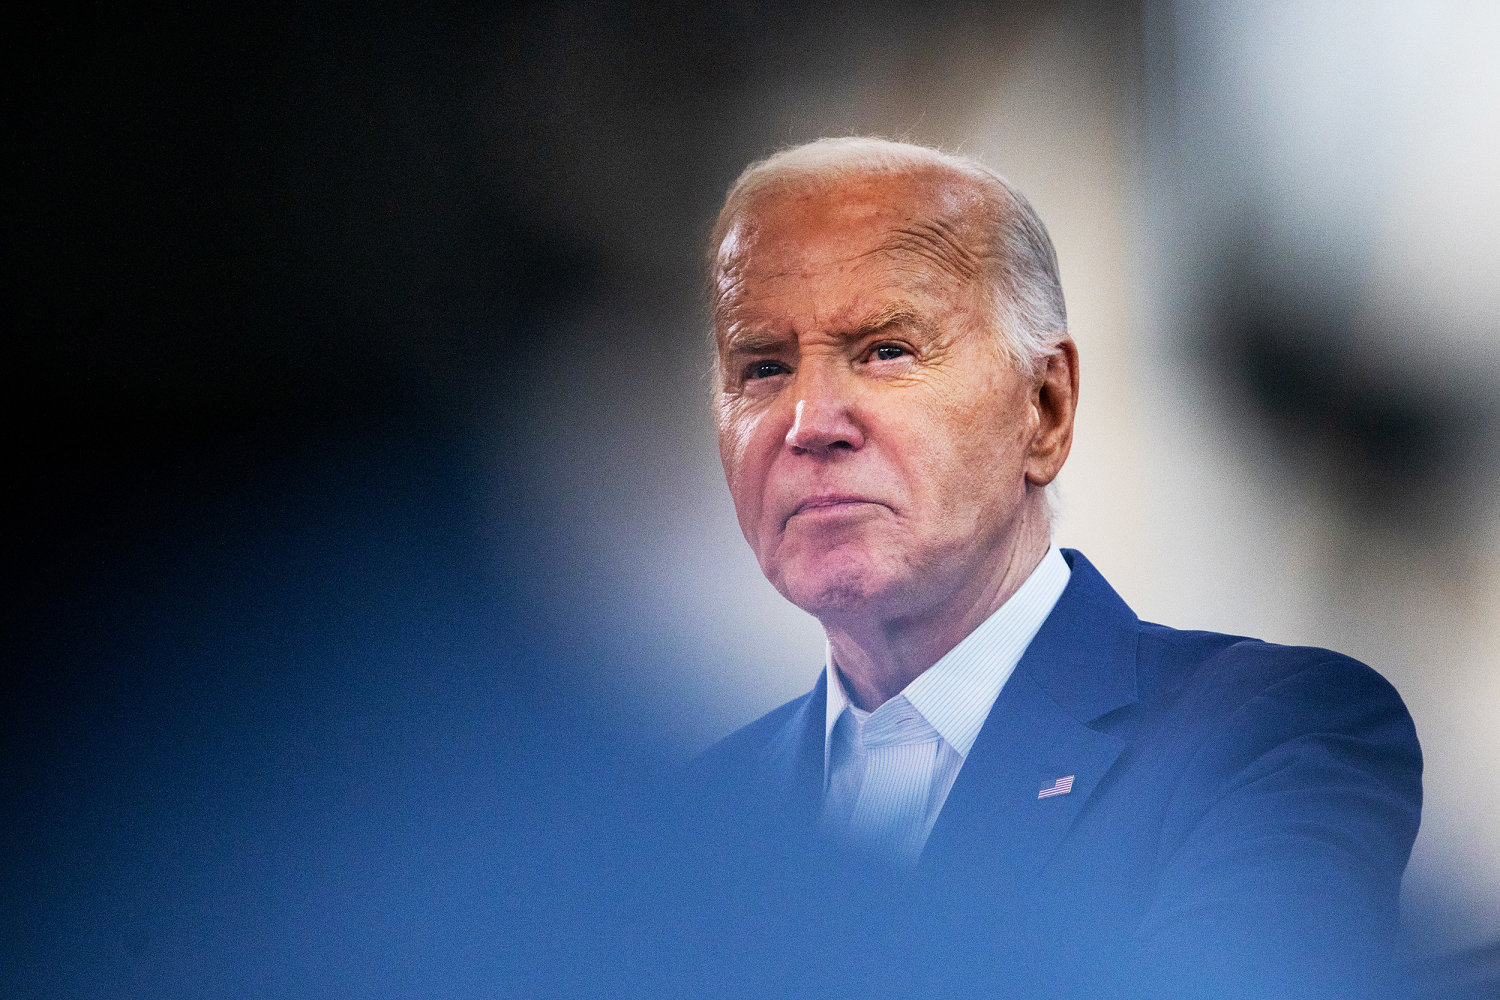 Biden says he'd re-evaluate staying in the race if diagnosed with a medical condition